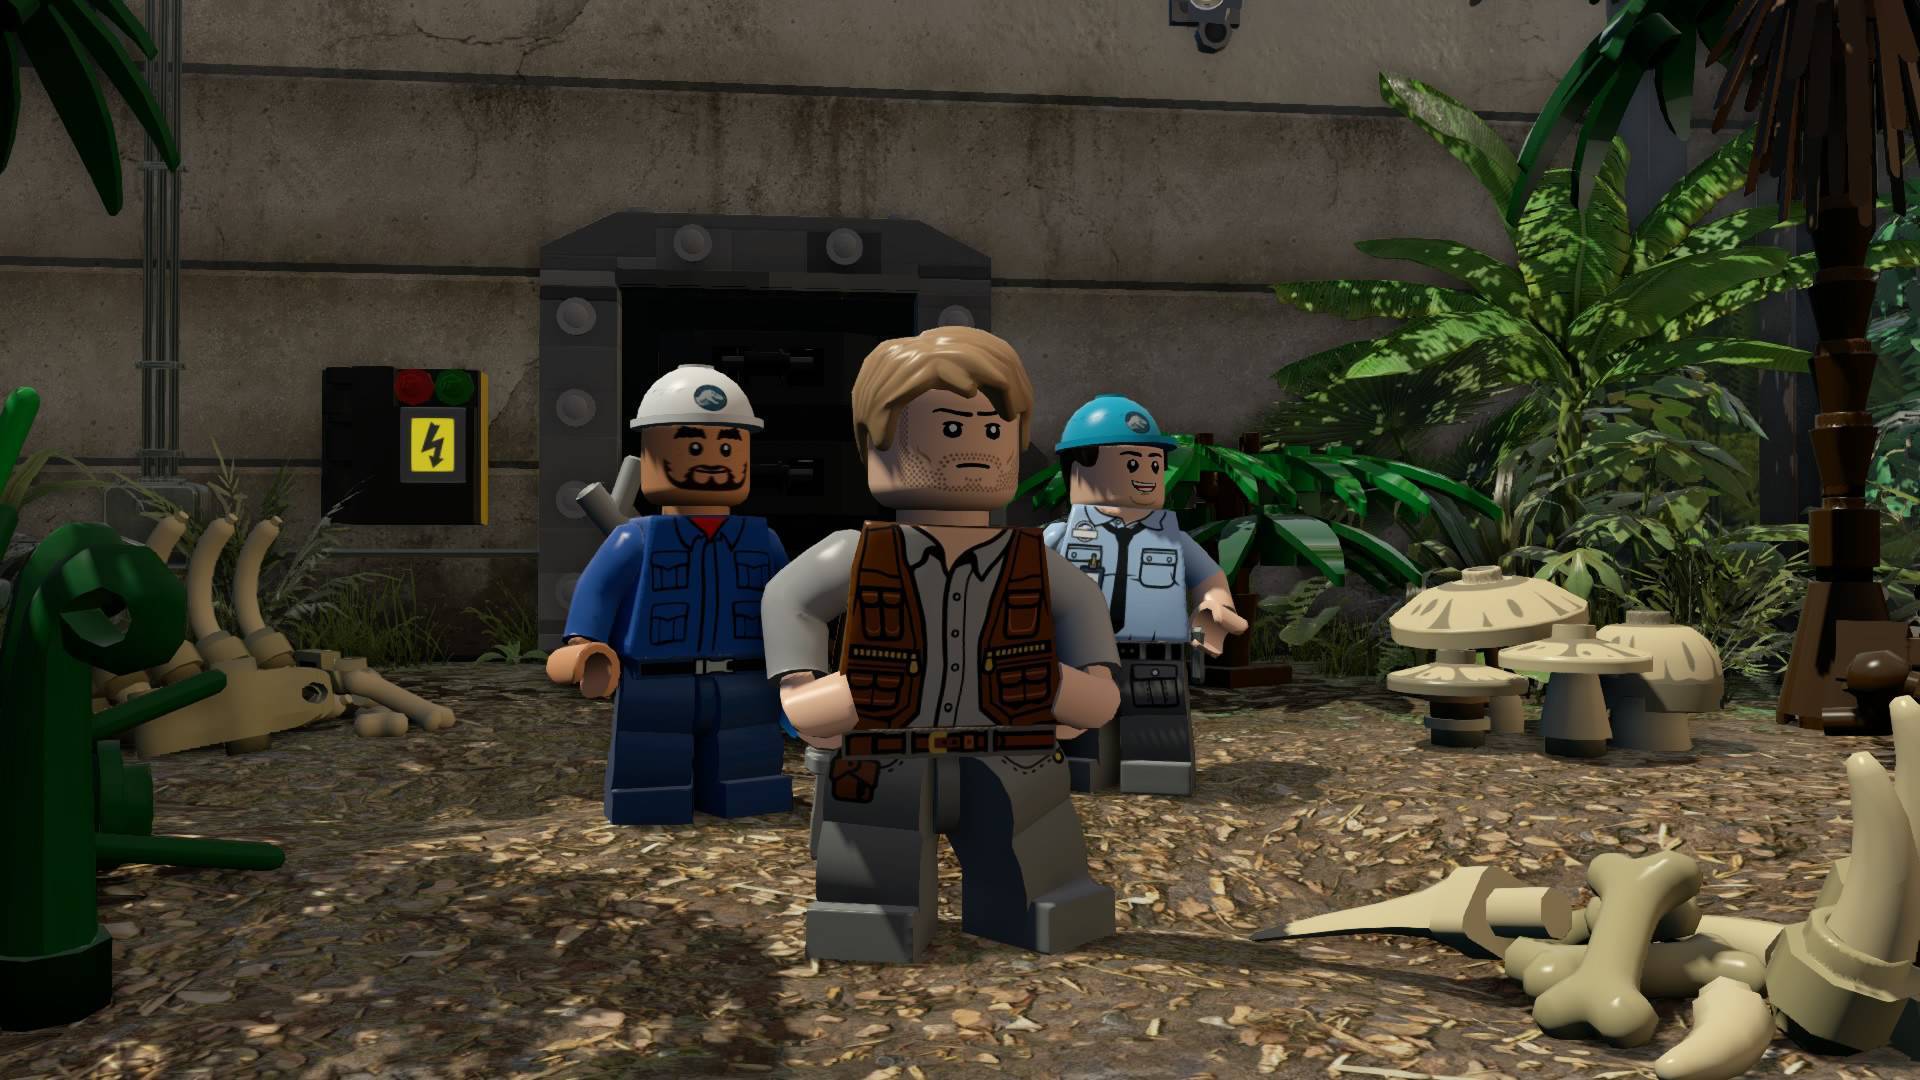 Buy LEGO Jurassic World (Switch) from £13.99 (Today) – Best Deals on